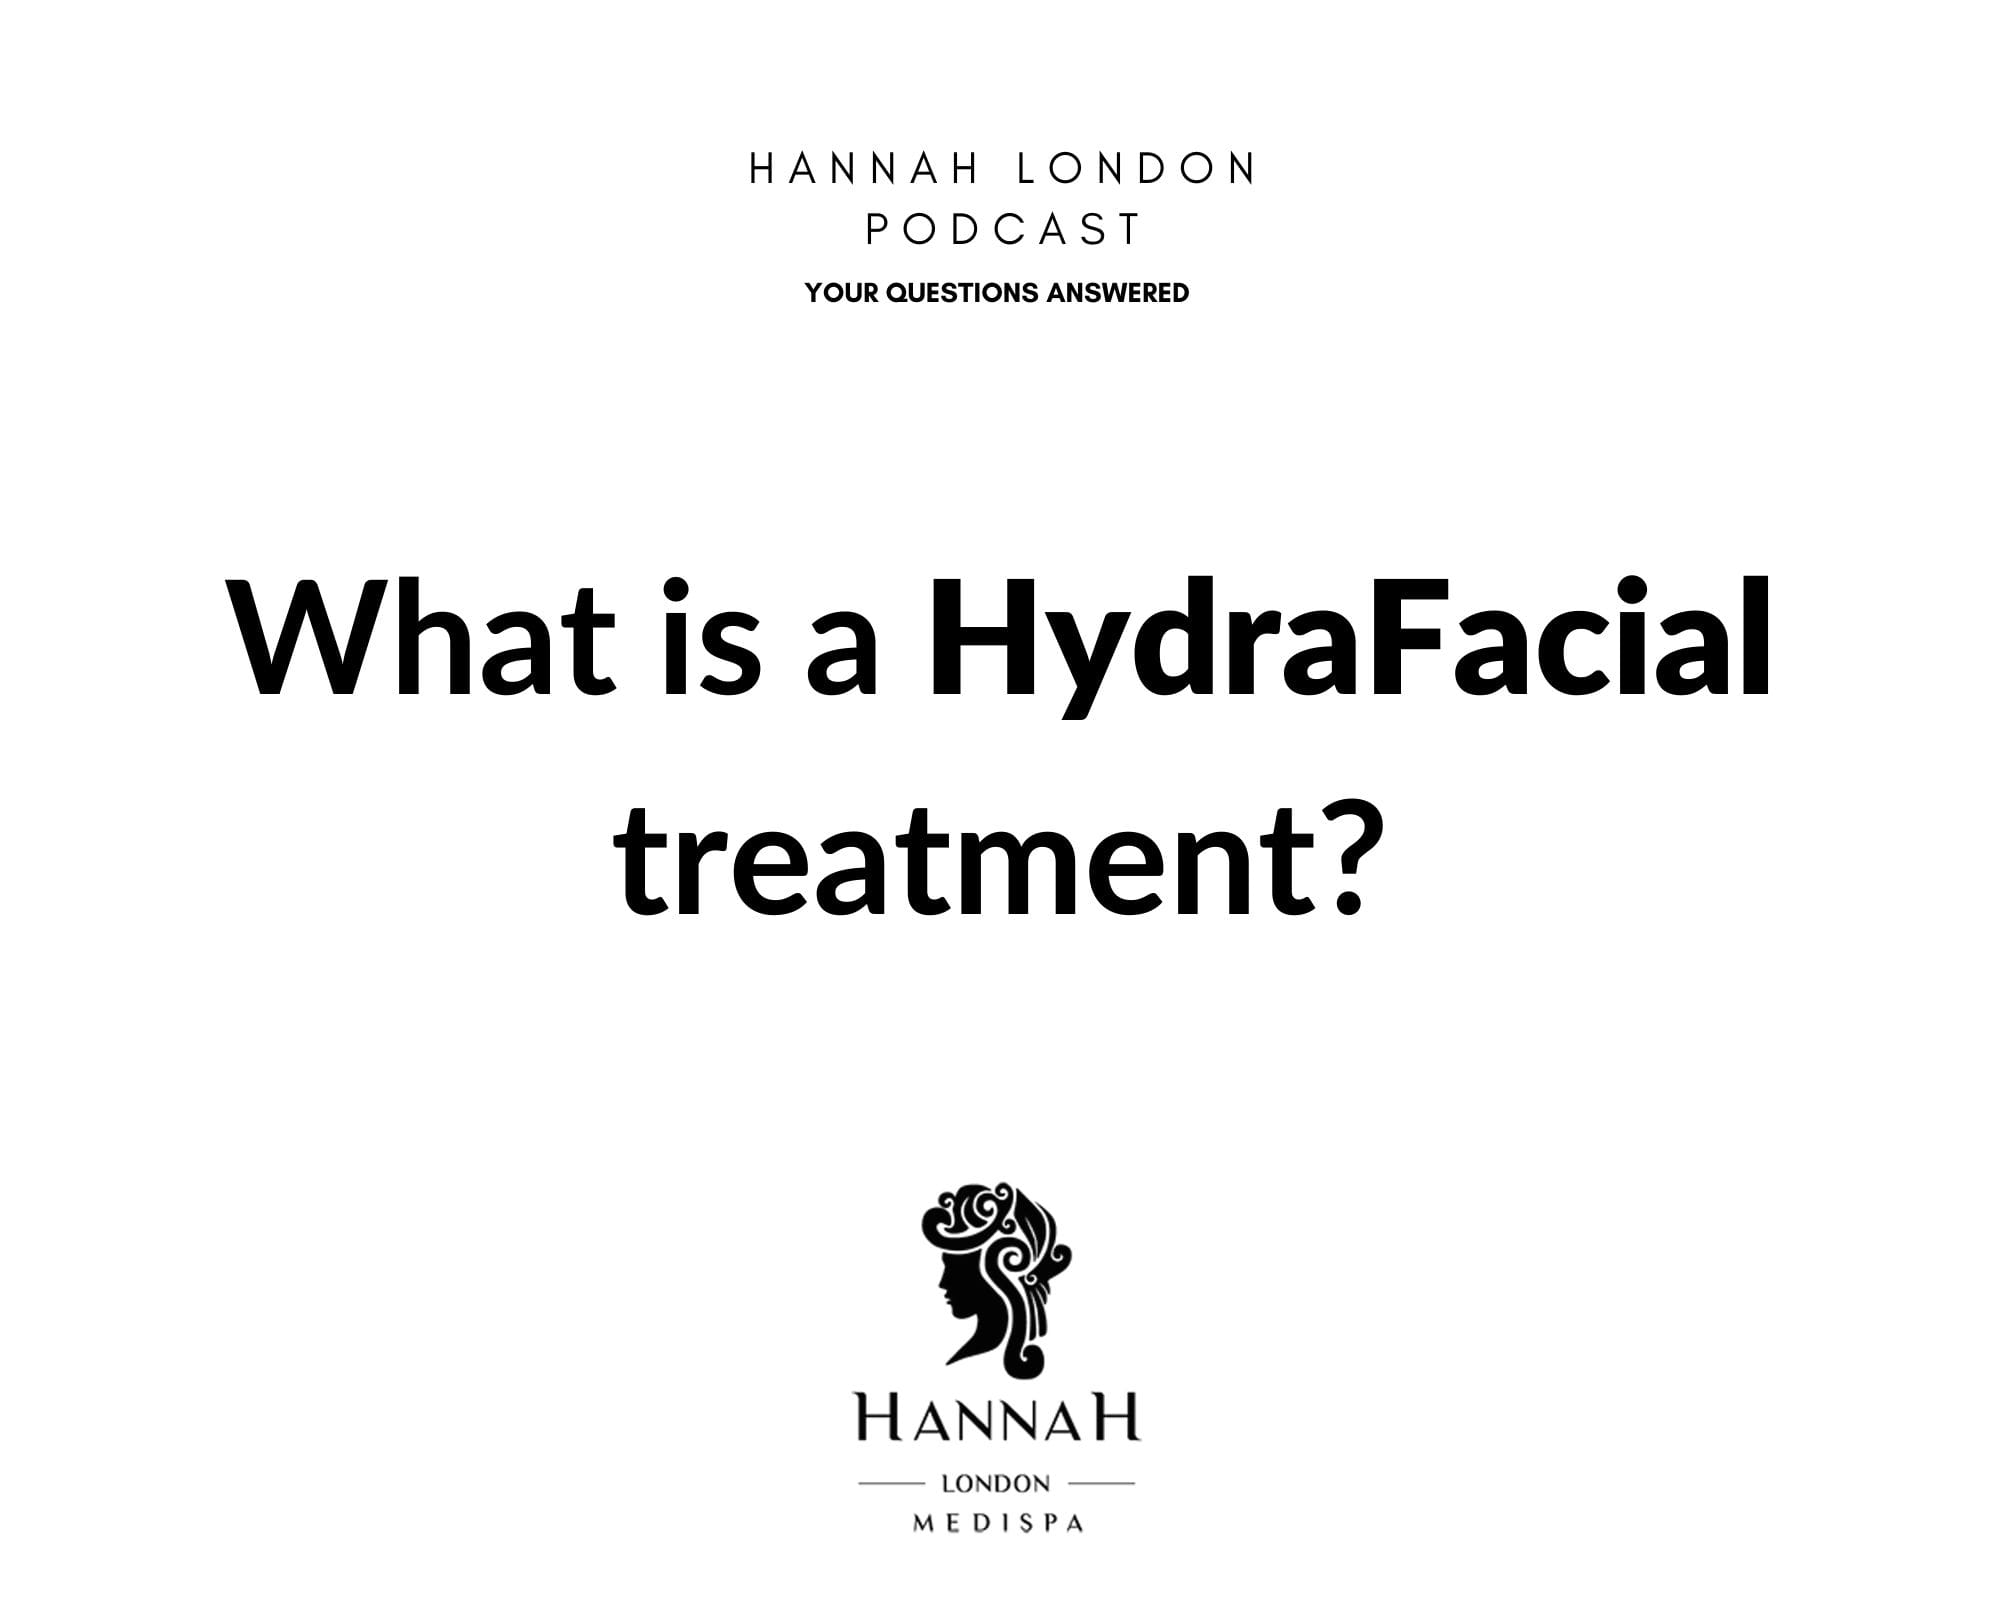 What is a HydraFacial treatment?